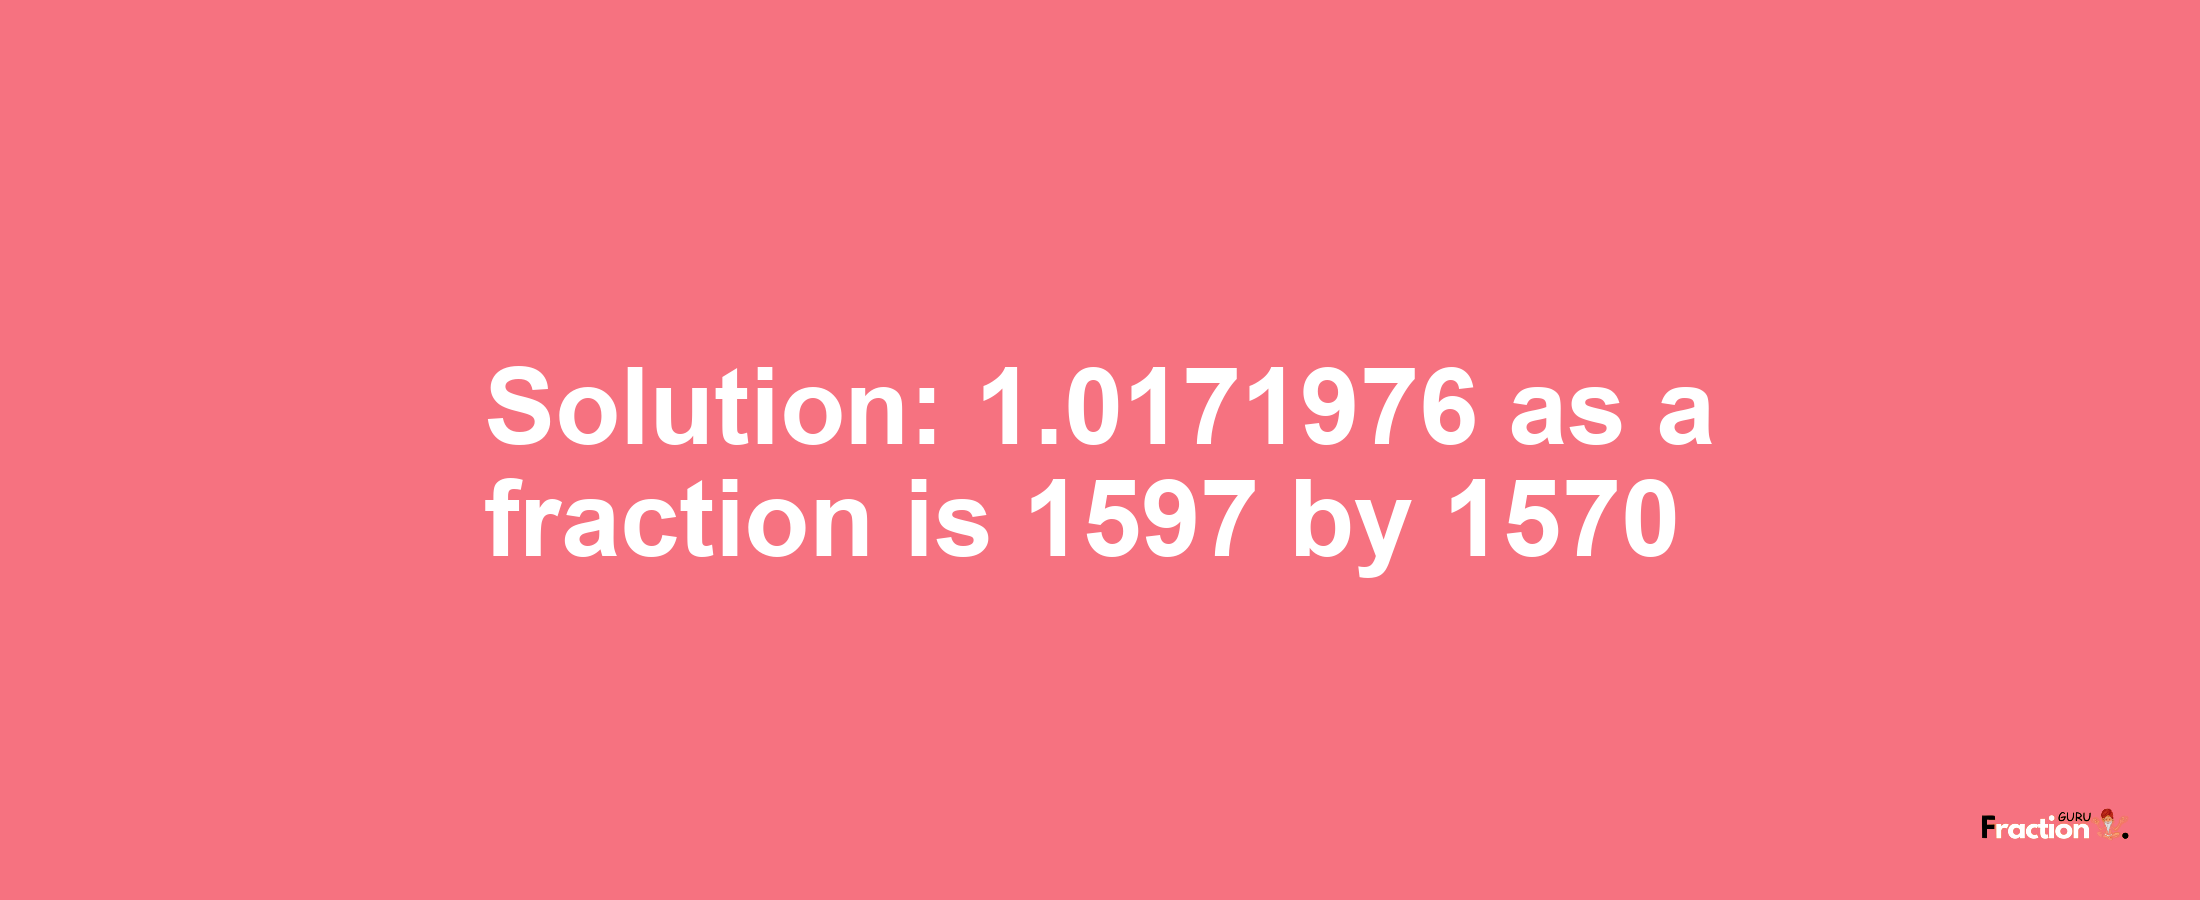 Solution:1.0171976 as a fraction is 1597/1570